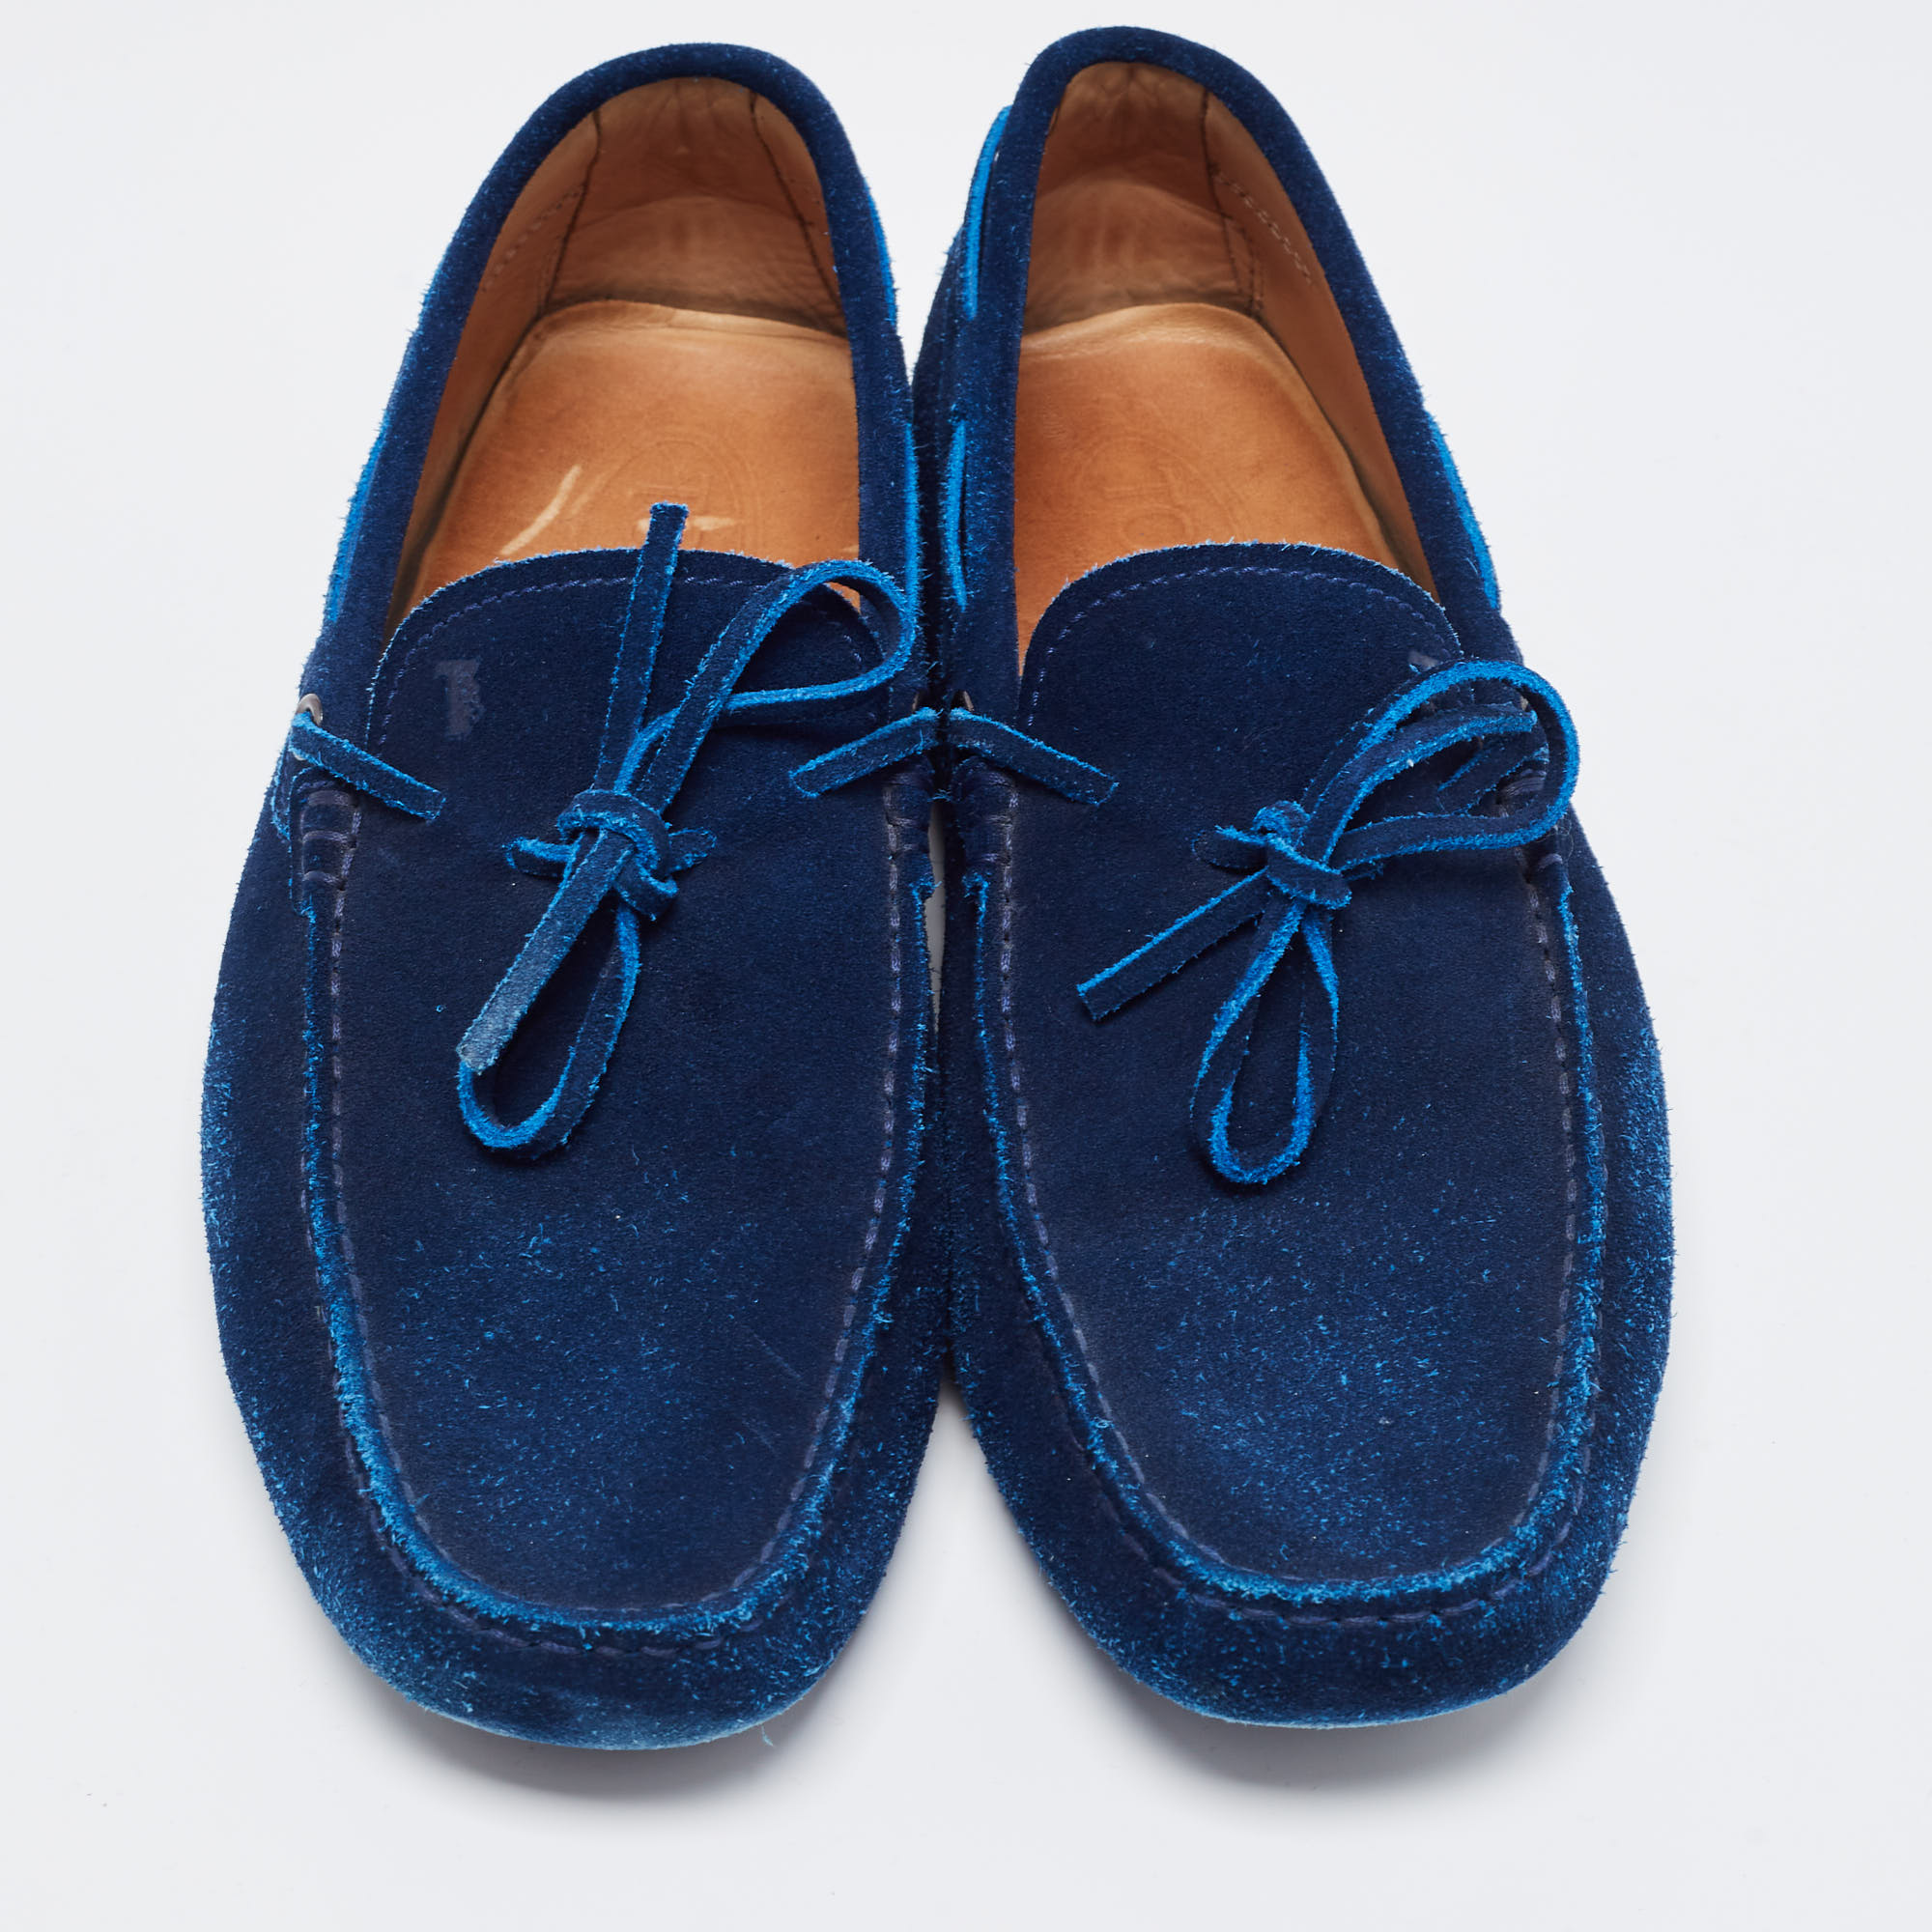 Tod's Blue Suede Bow Slip On Loafers Size 41.5